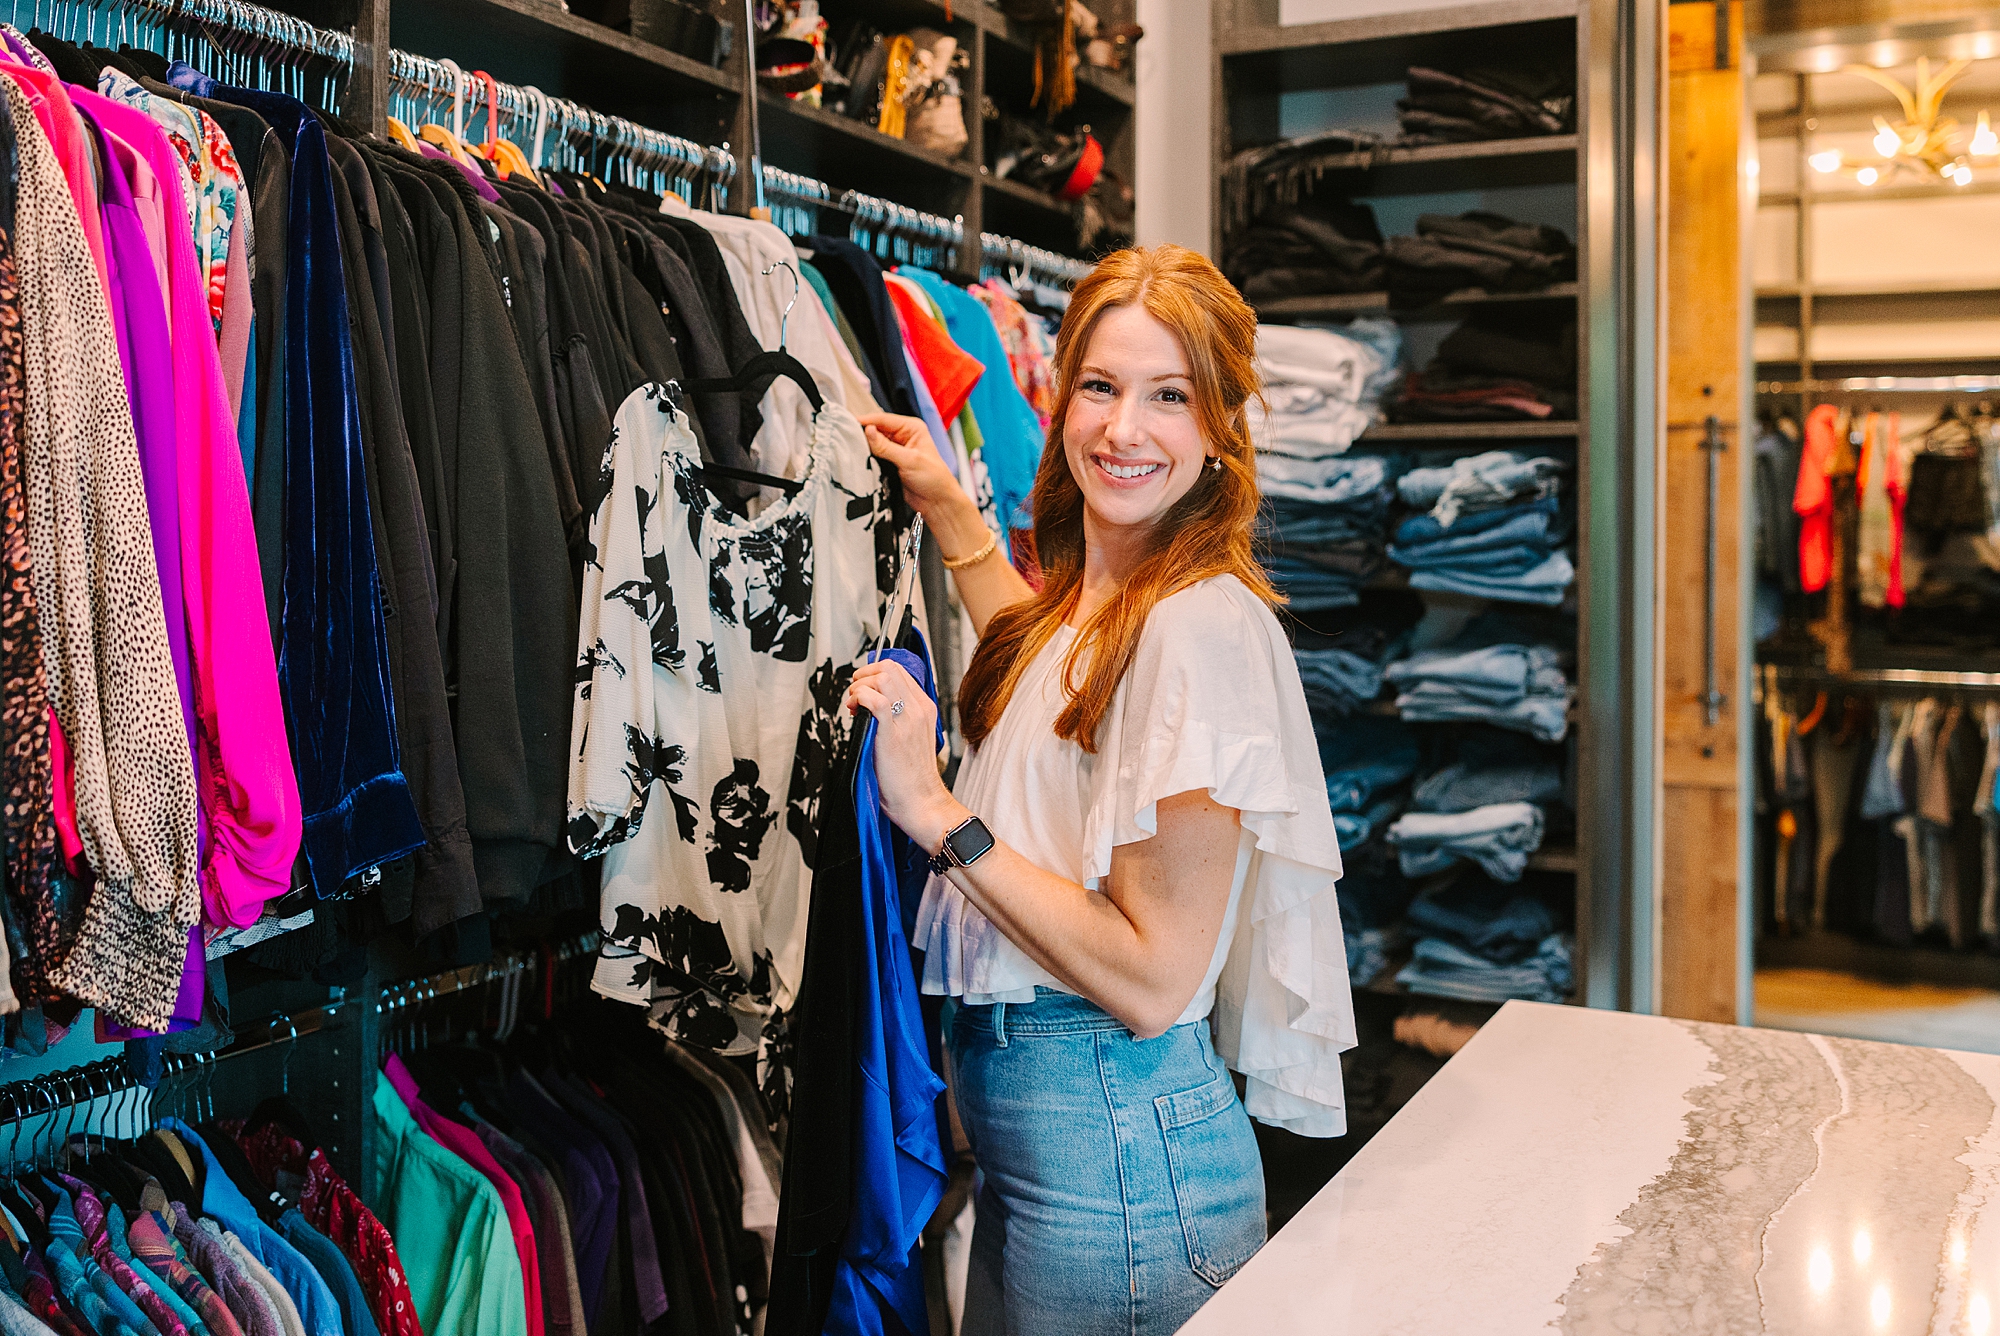 stylist from Be Styled Co. goes through clothes in closet